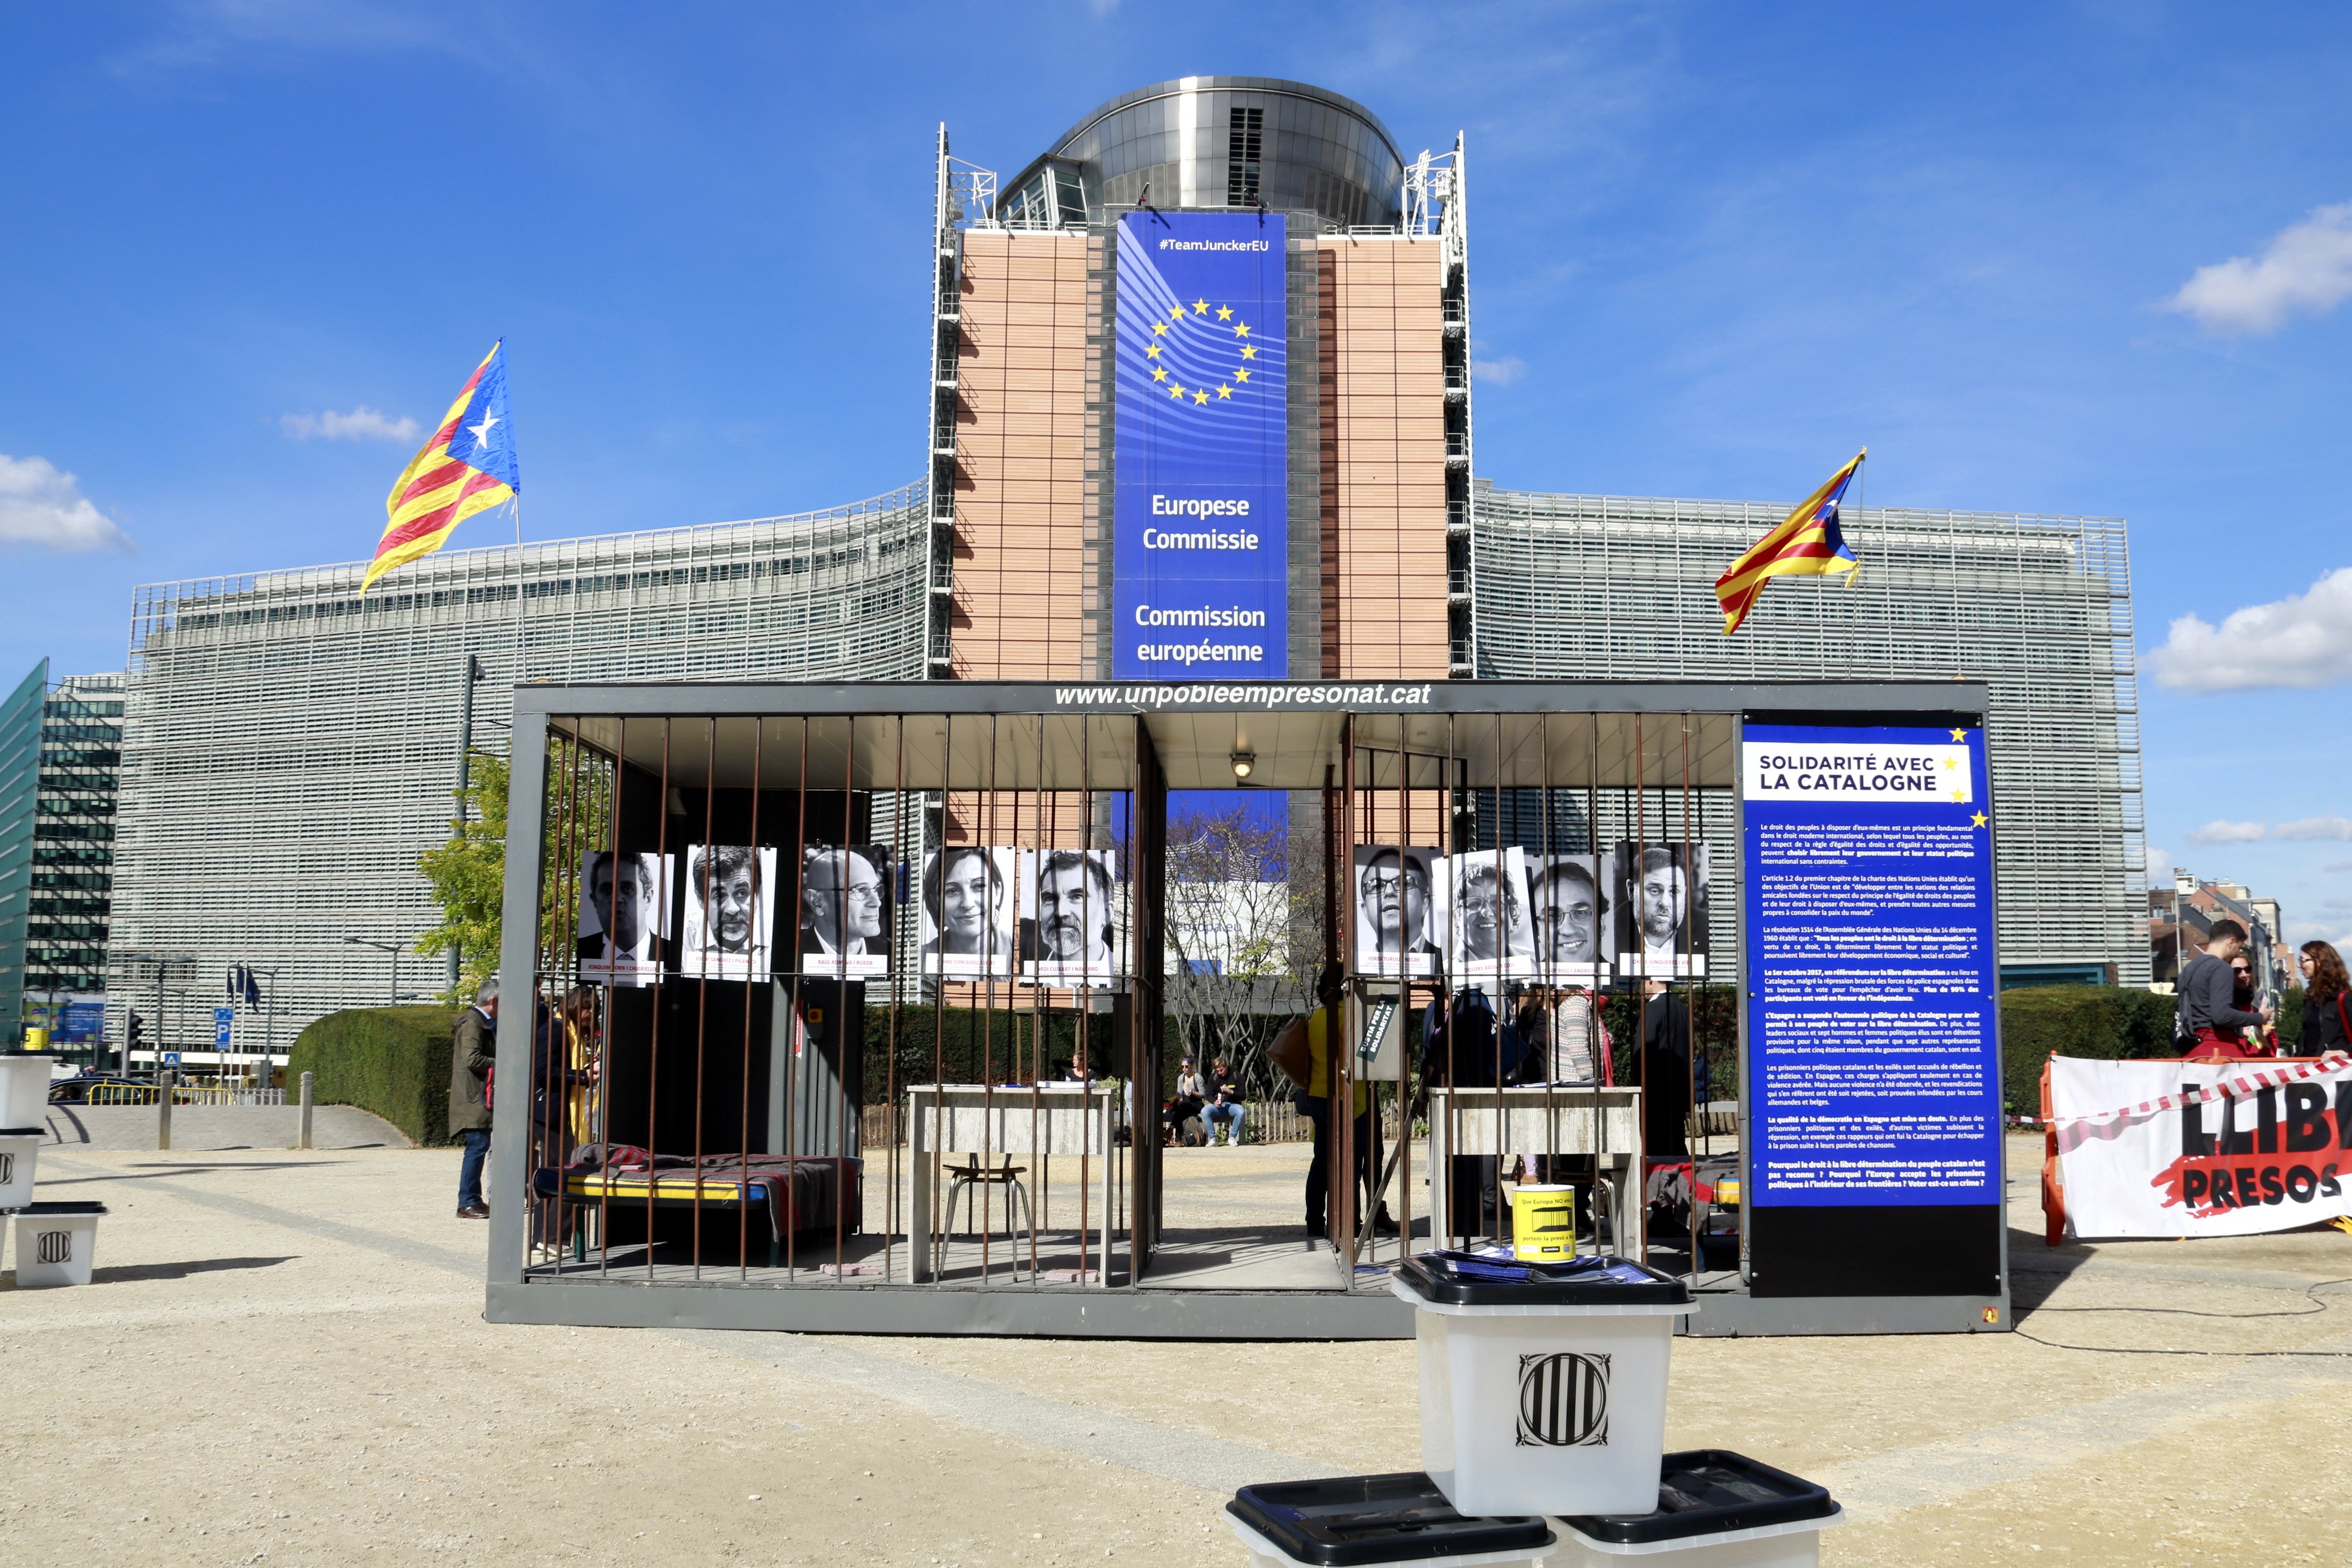 Catalan organisations denounce prisoners' situation in Brussels